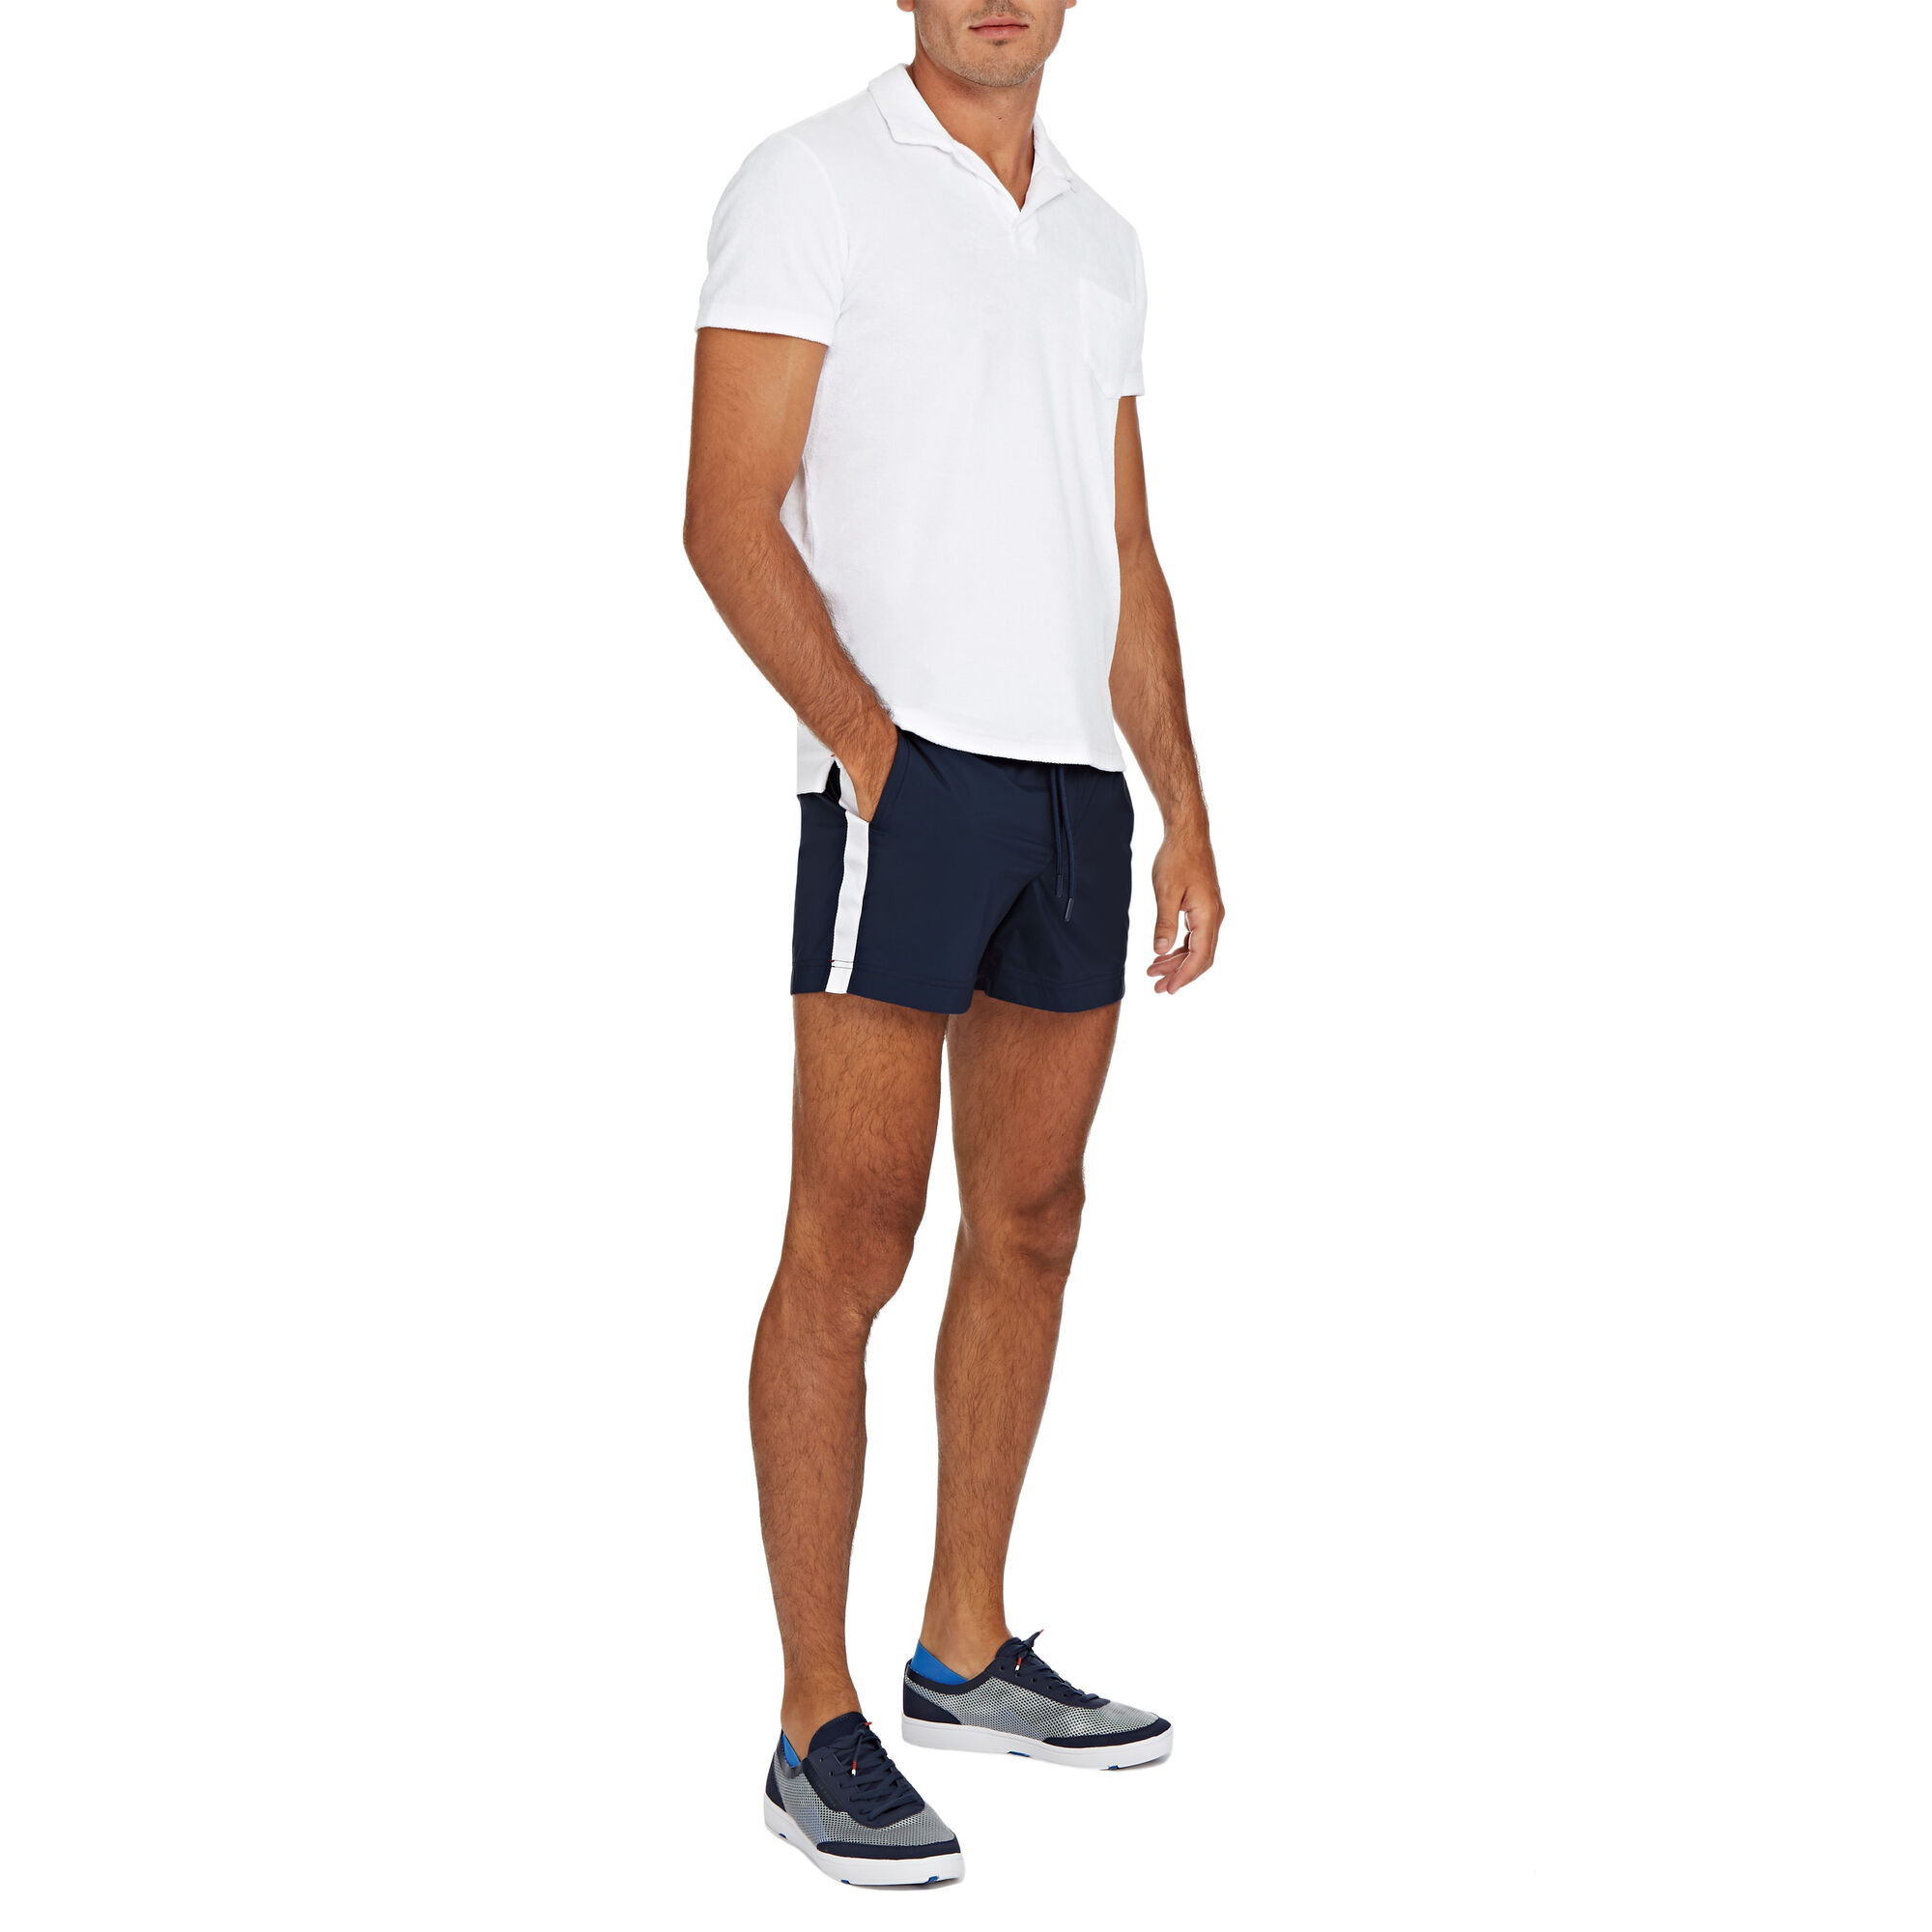 ORLEBAR_BROWN_SETTER_SPORT_DRAWCORD_NAVY_WHITE_270673_MODEL_OUTFIT.jpg?sw=2000&sh=2000&sm=fit